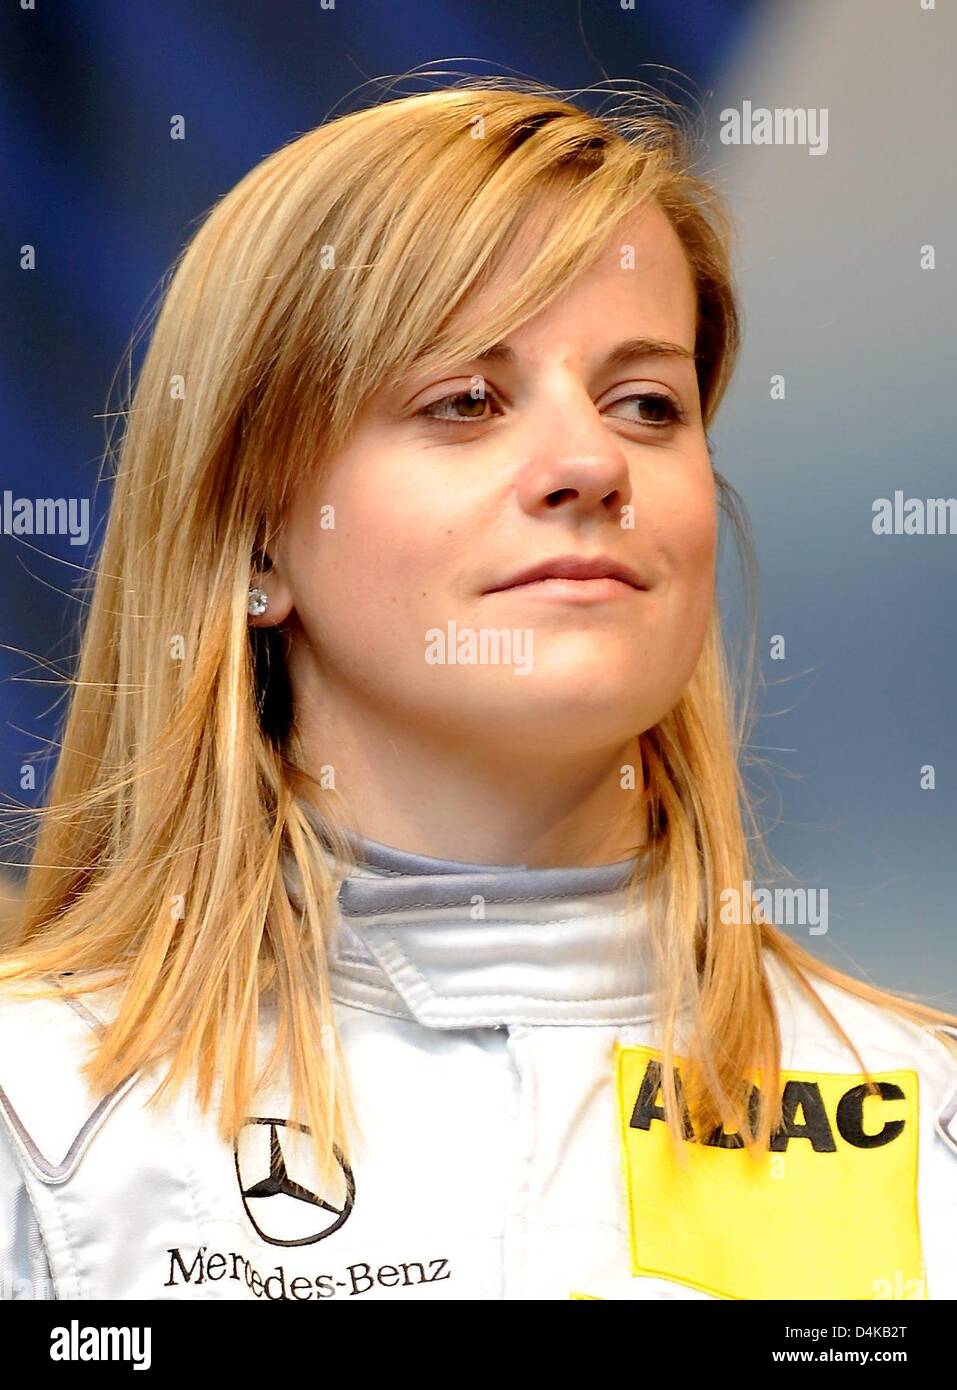 Scottish race driver Susie Stoddart of Team Persson Motorsport pictured during the presentation of the German Touring Car Masters in Duesseldorf, Germany, 19 April 2009. The German Touring Car Masters will start with a race at Hockenheimring on 17 May 2009. Photo: David Ebener Stock Photo